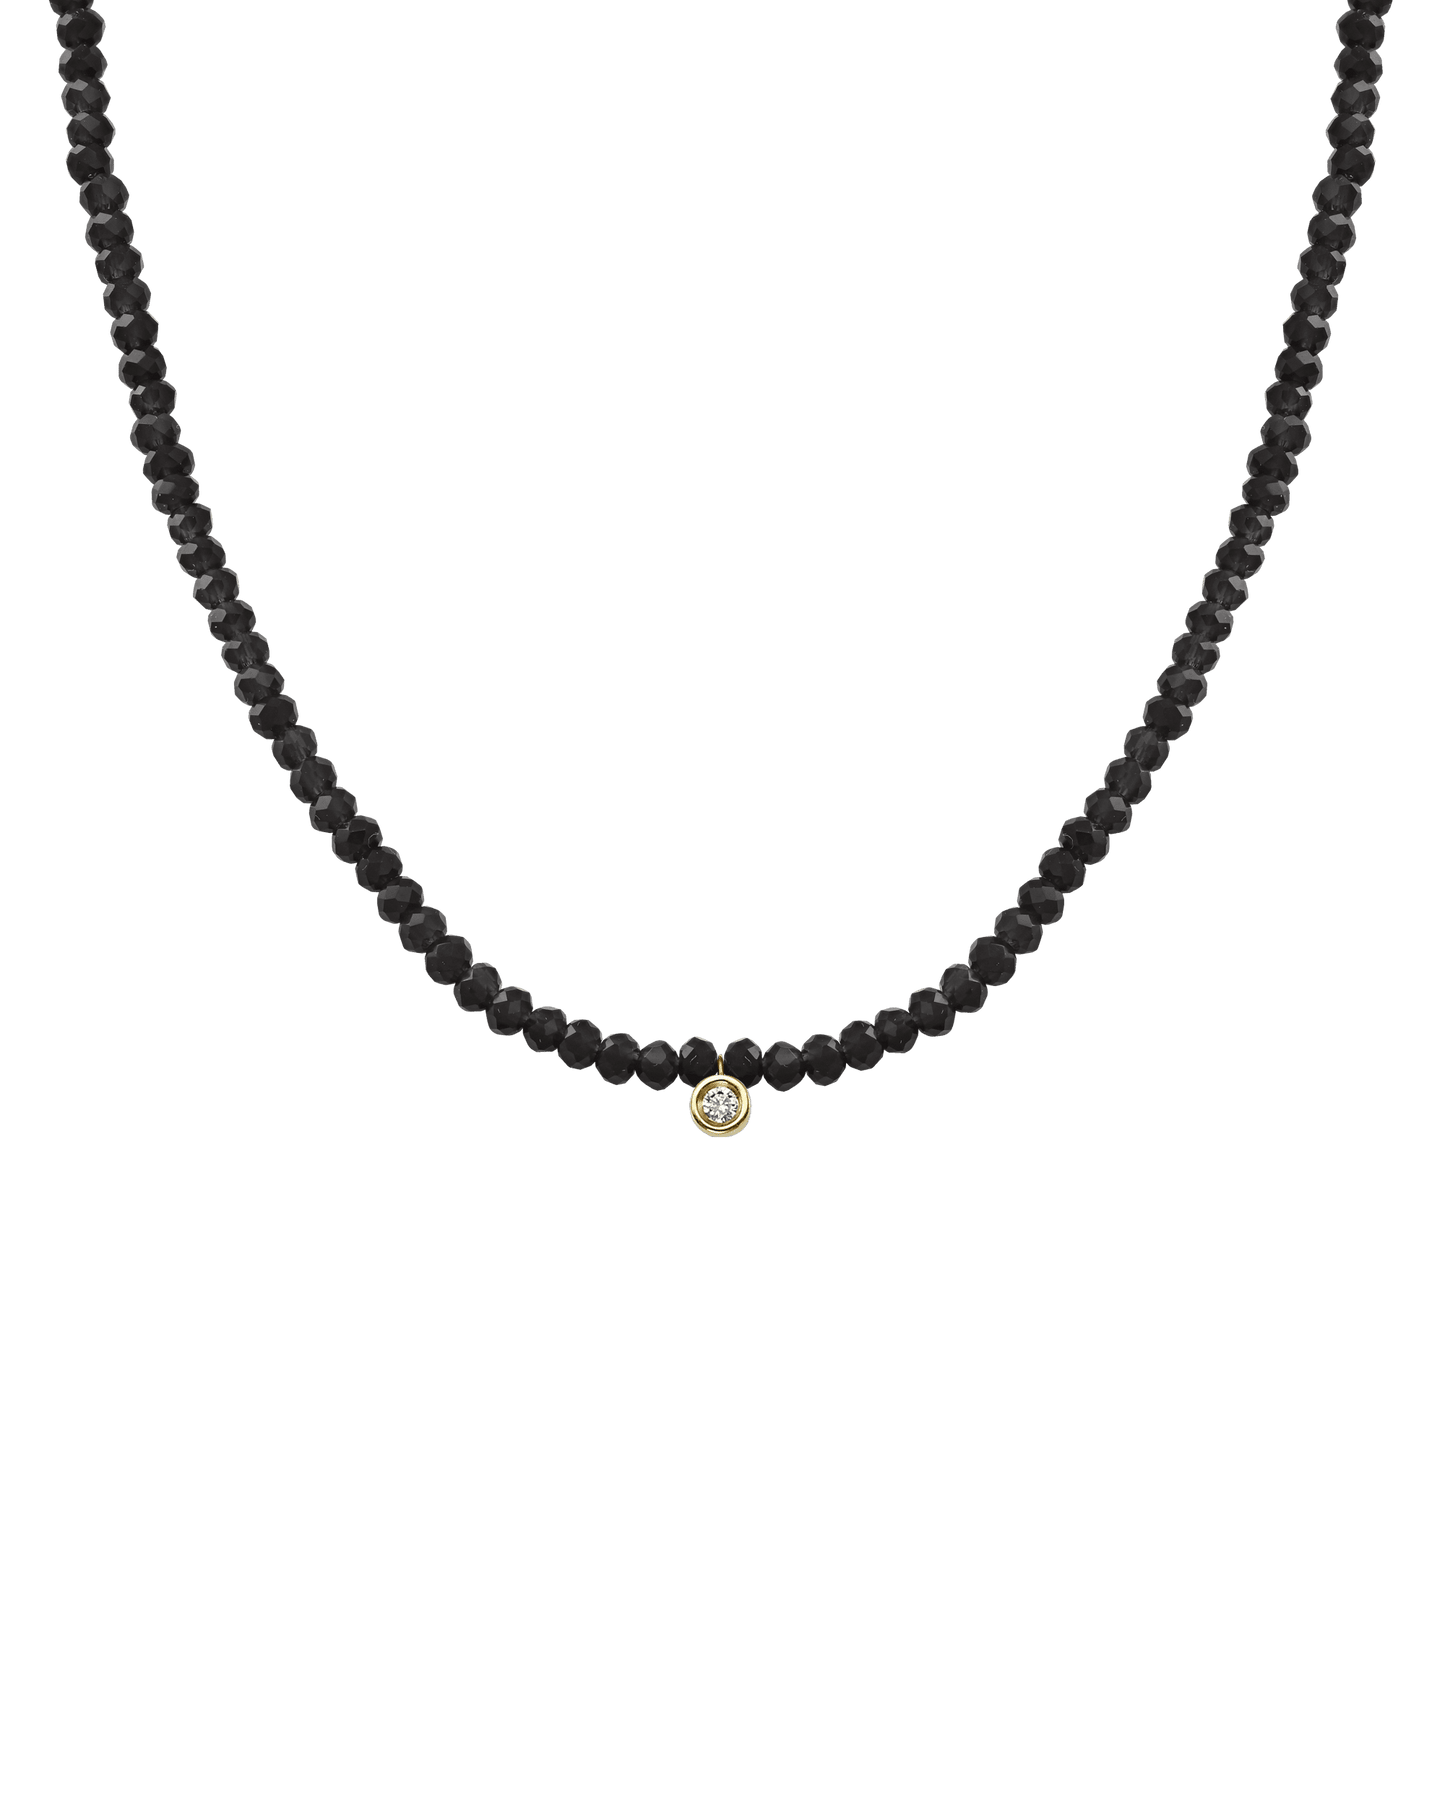 The Gemstone & Diamond Necklace - 14K Yellow Gold Necklaces 14K Solid Gold Glass Beads Black Spinnel Small: 0.03ct 14"